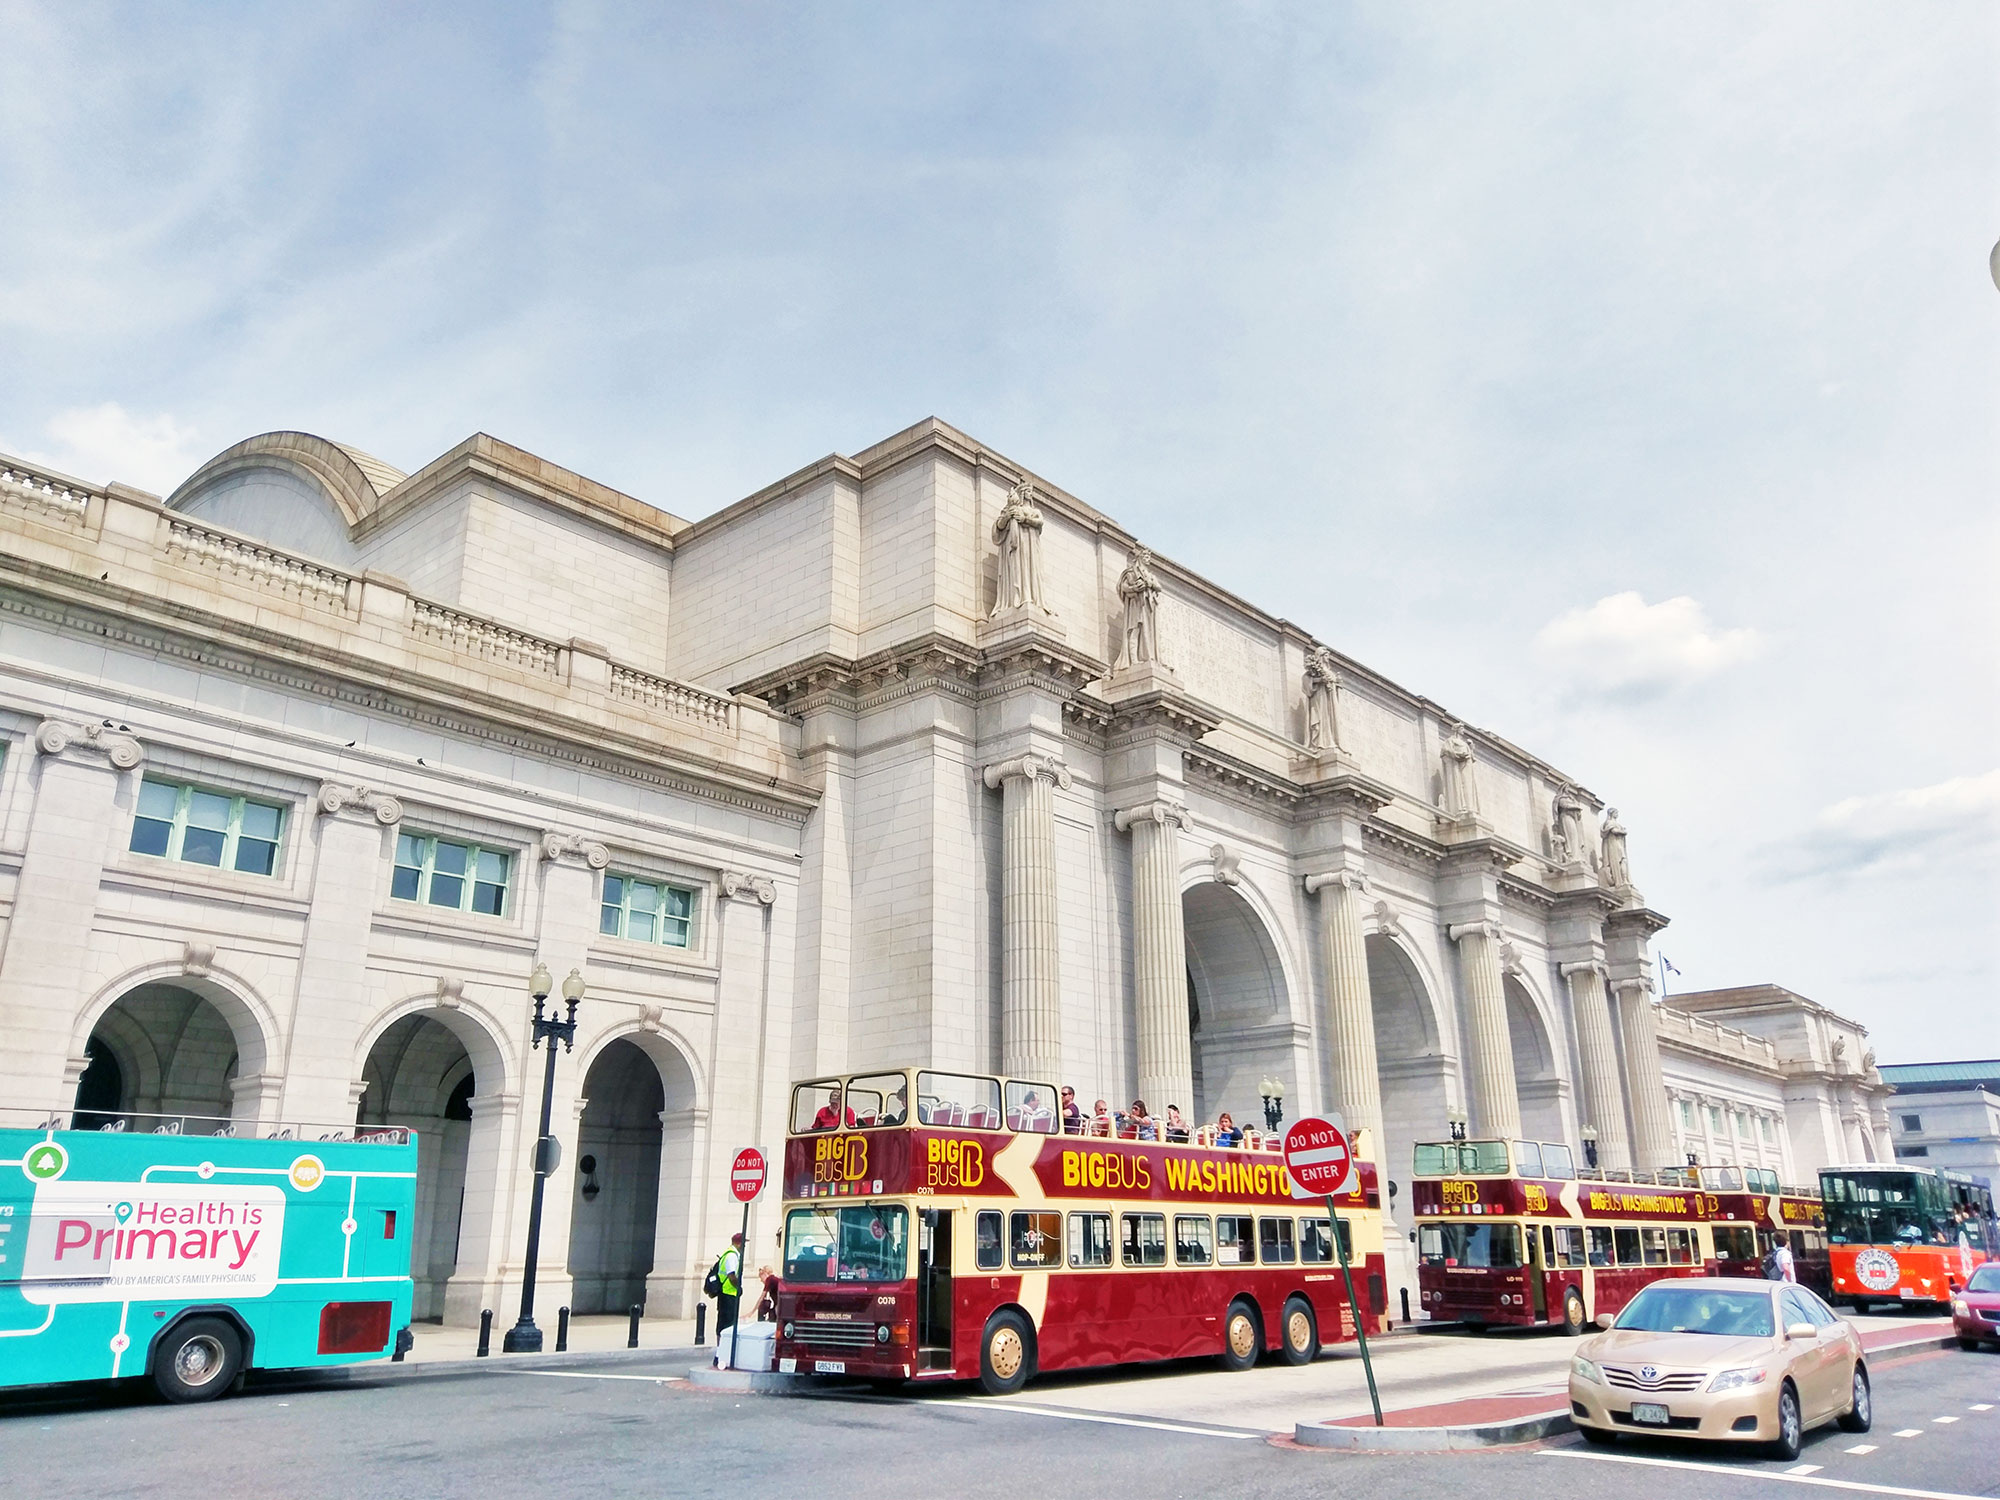 Tour buses in front of Union Station in Washington D.C.